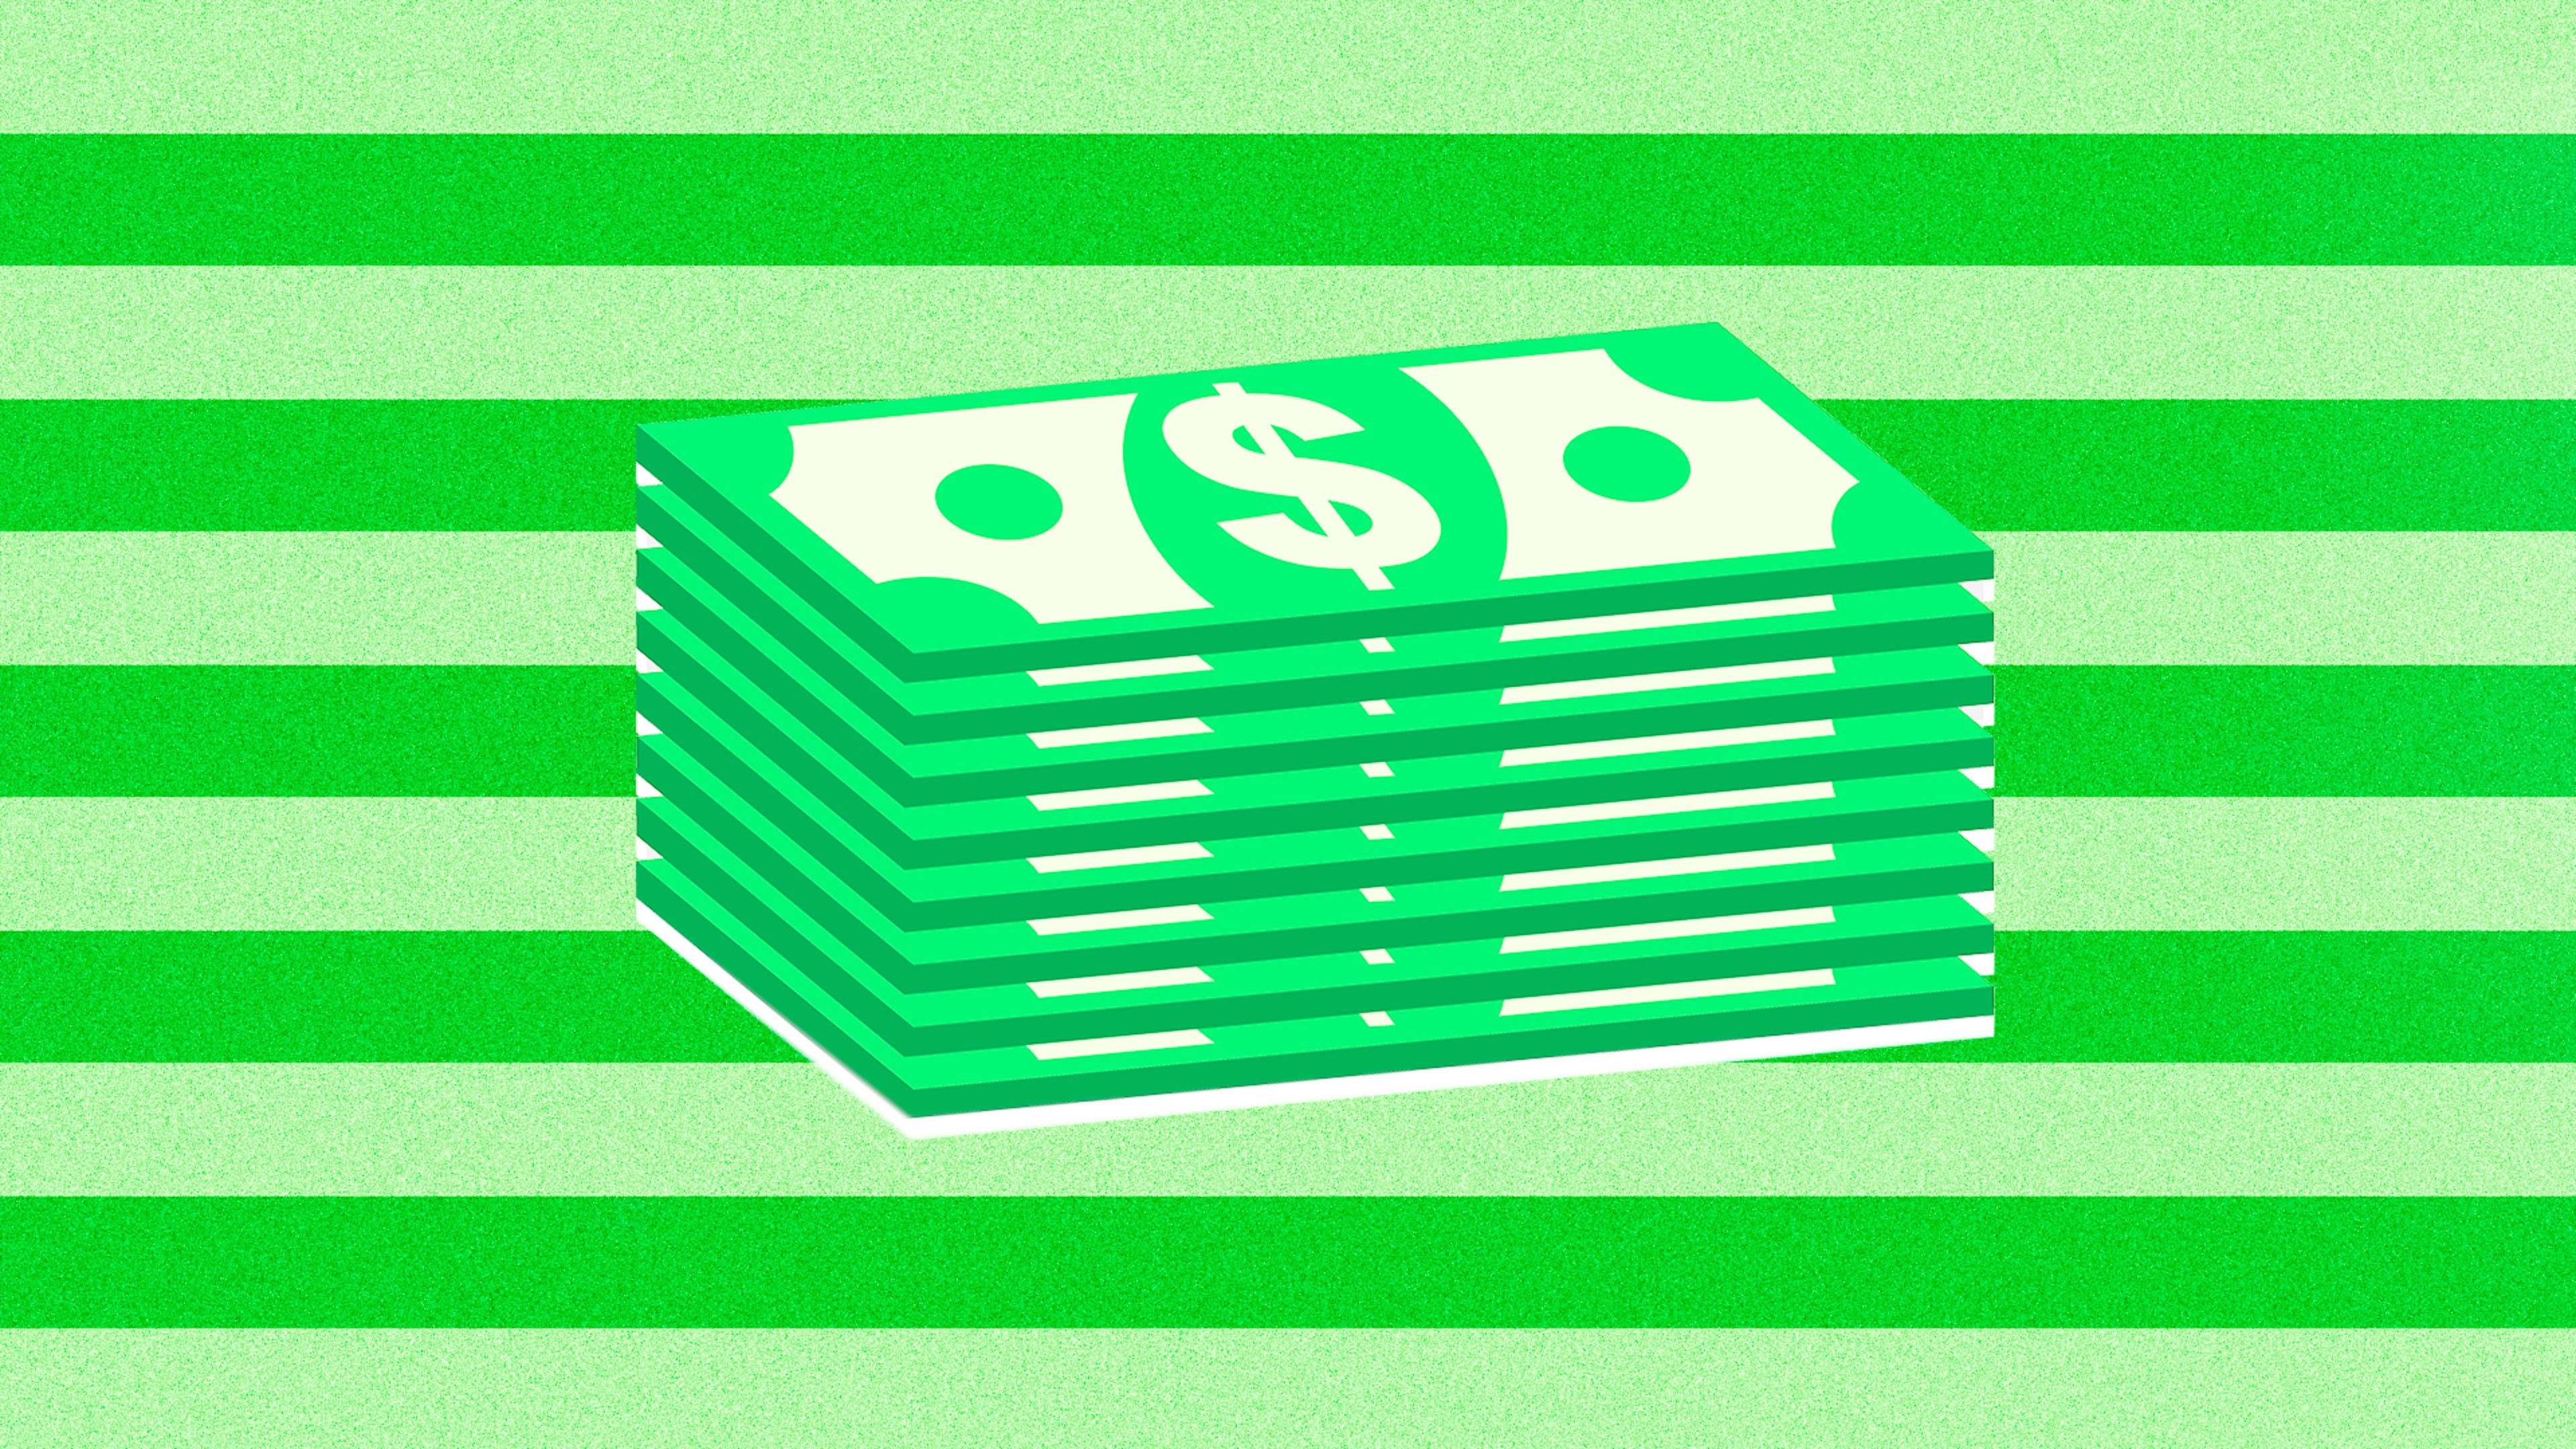 “Salary is a necessary evil,” and other thoughts on startup pay